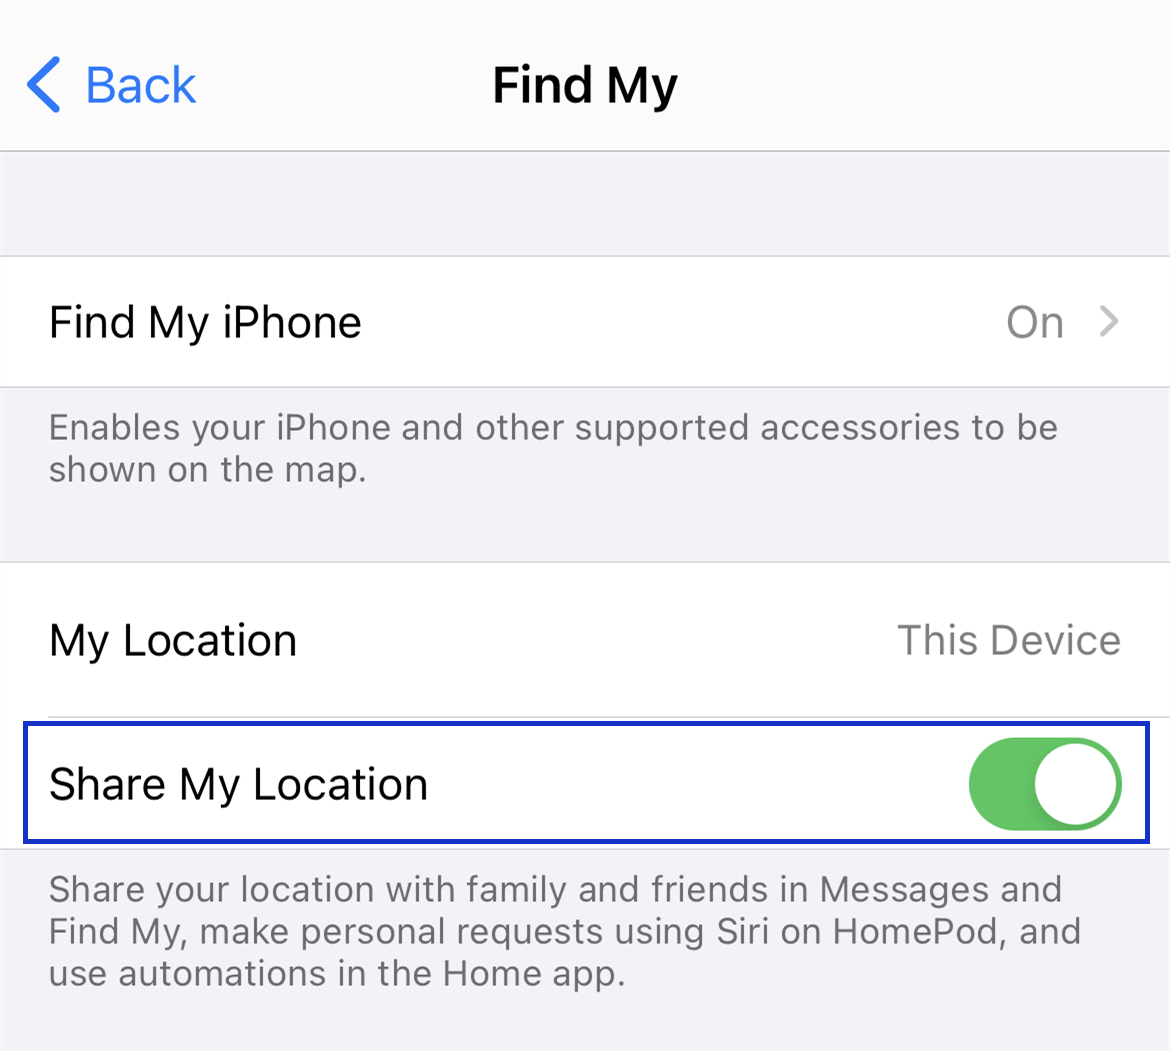 Turn on Share My Location in Find My